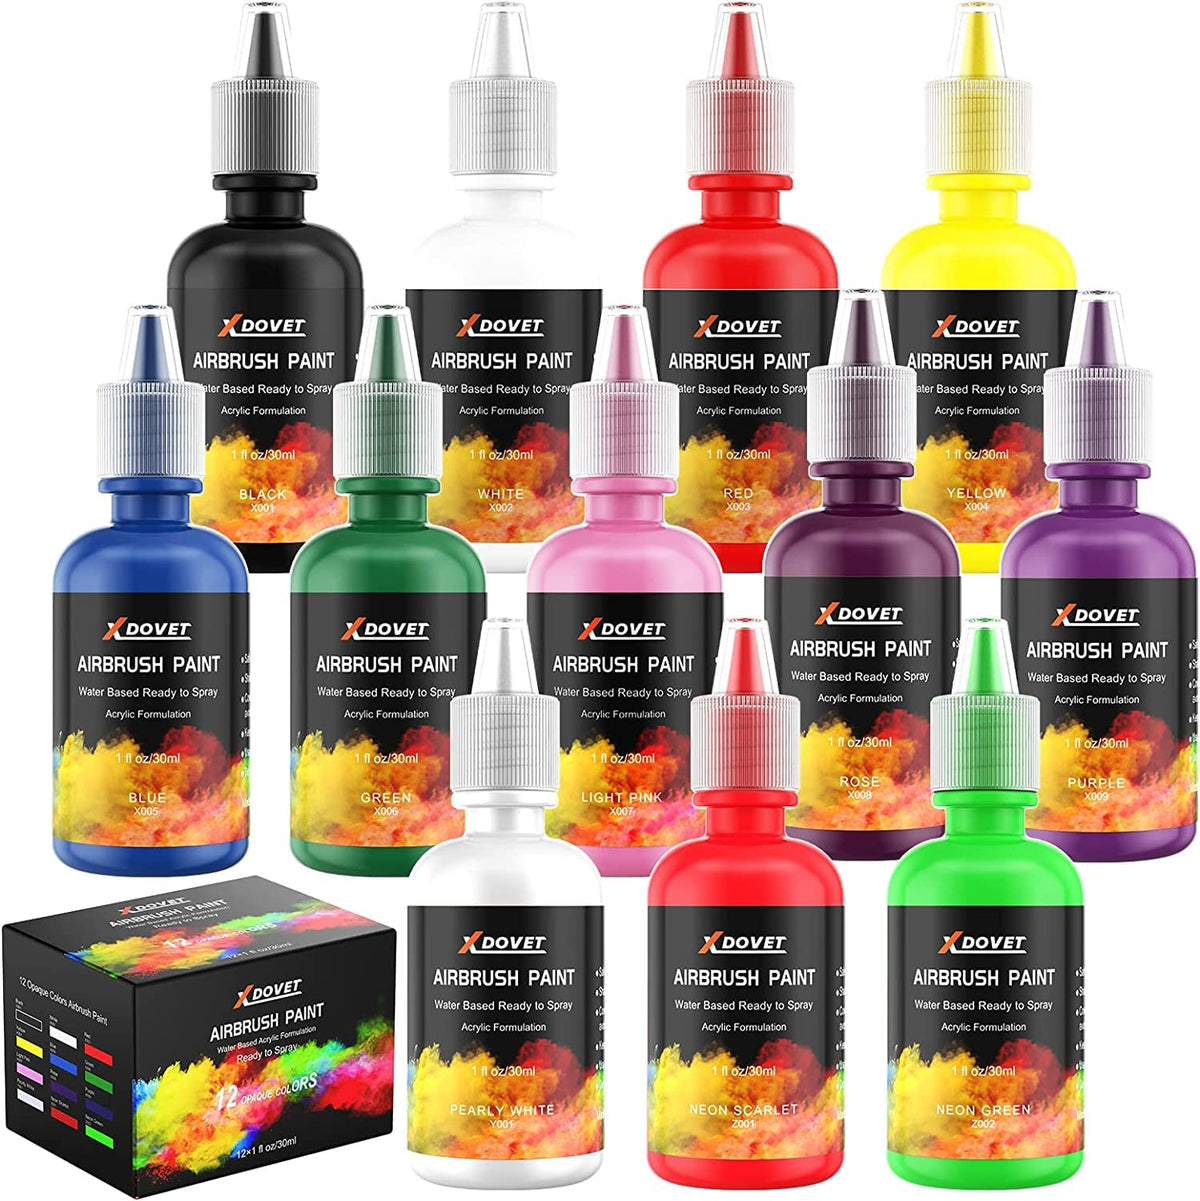 UPGREY Airbrush Paint, 18 Color Airbrush Paint Set, Opaque & Neon